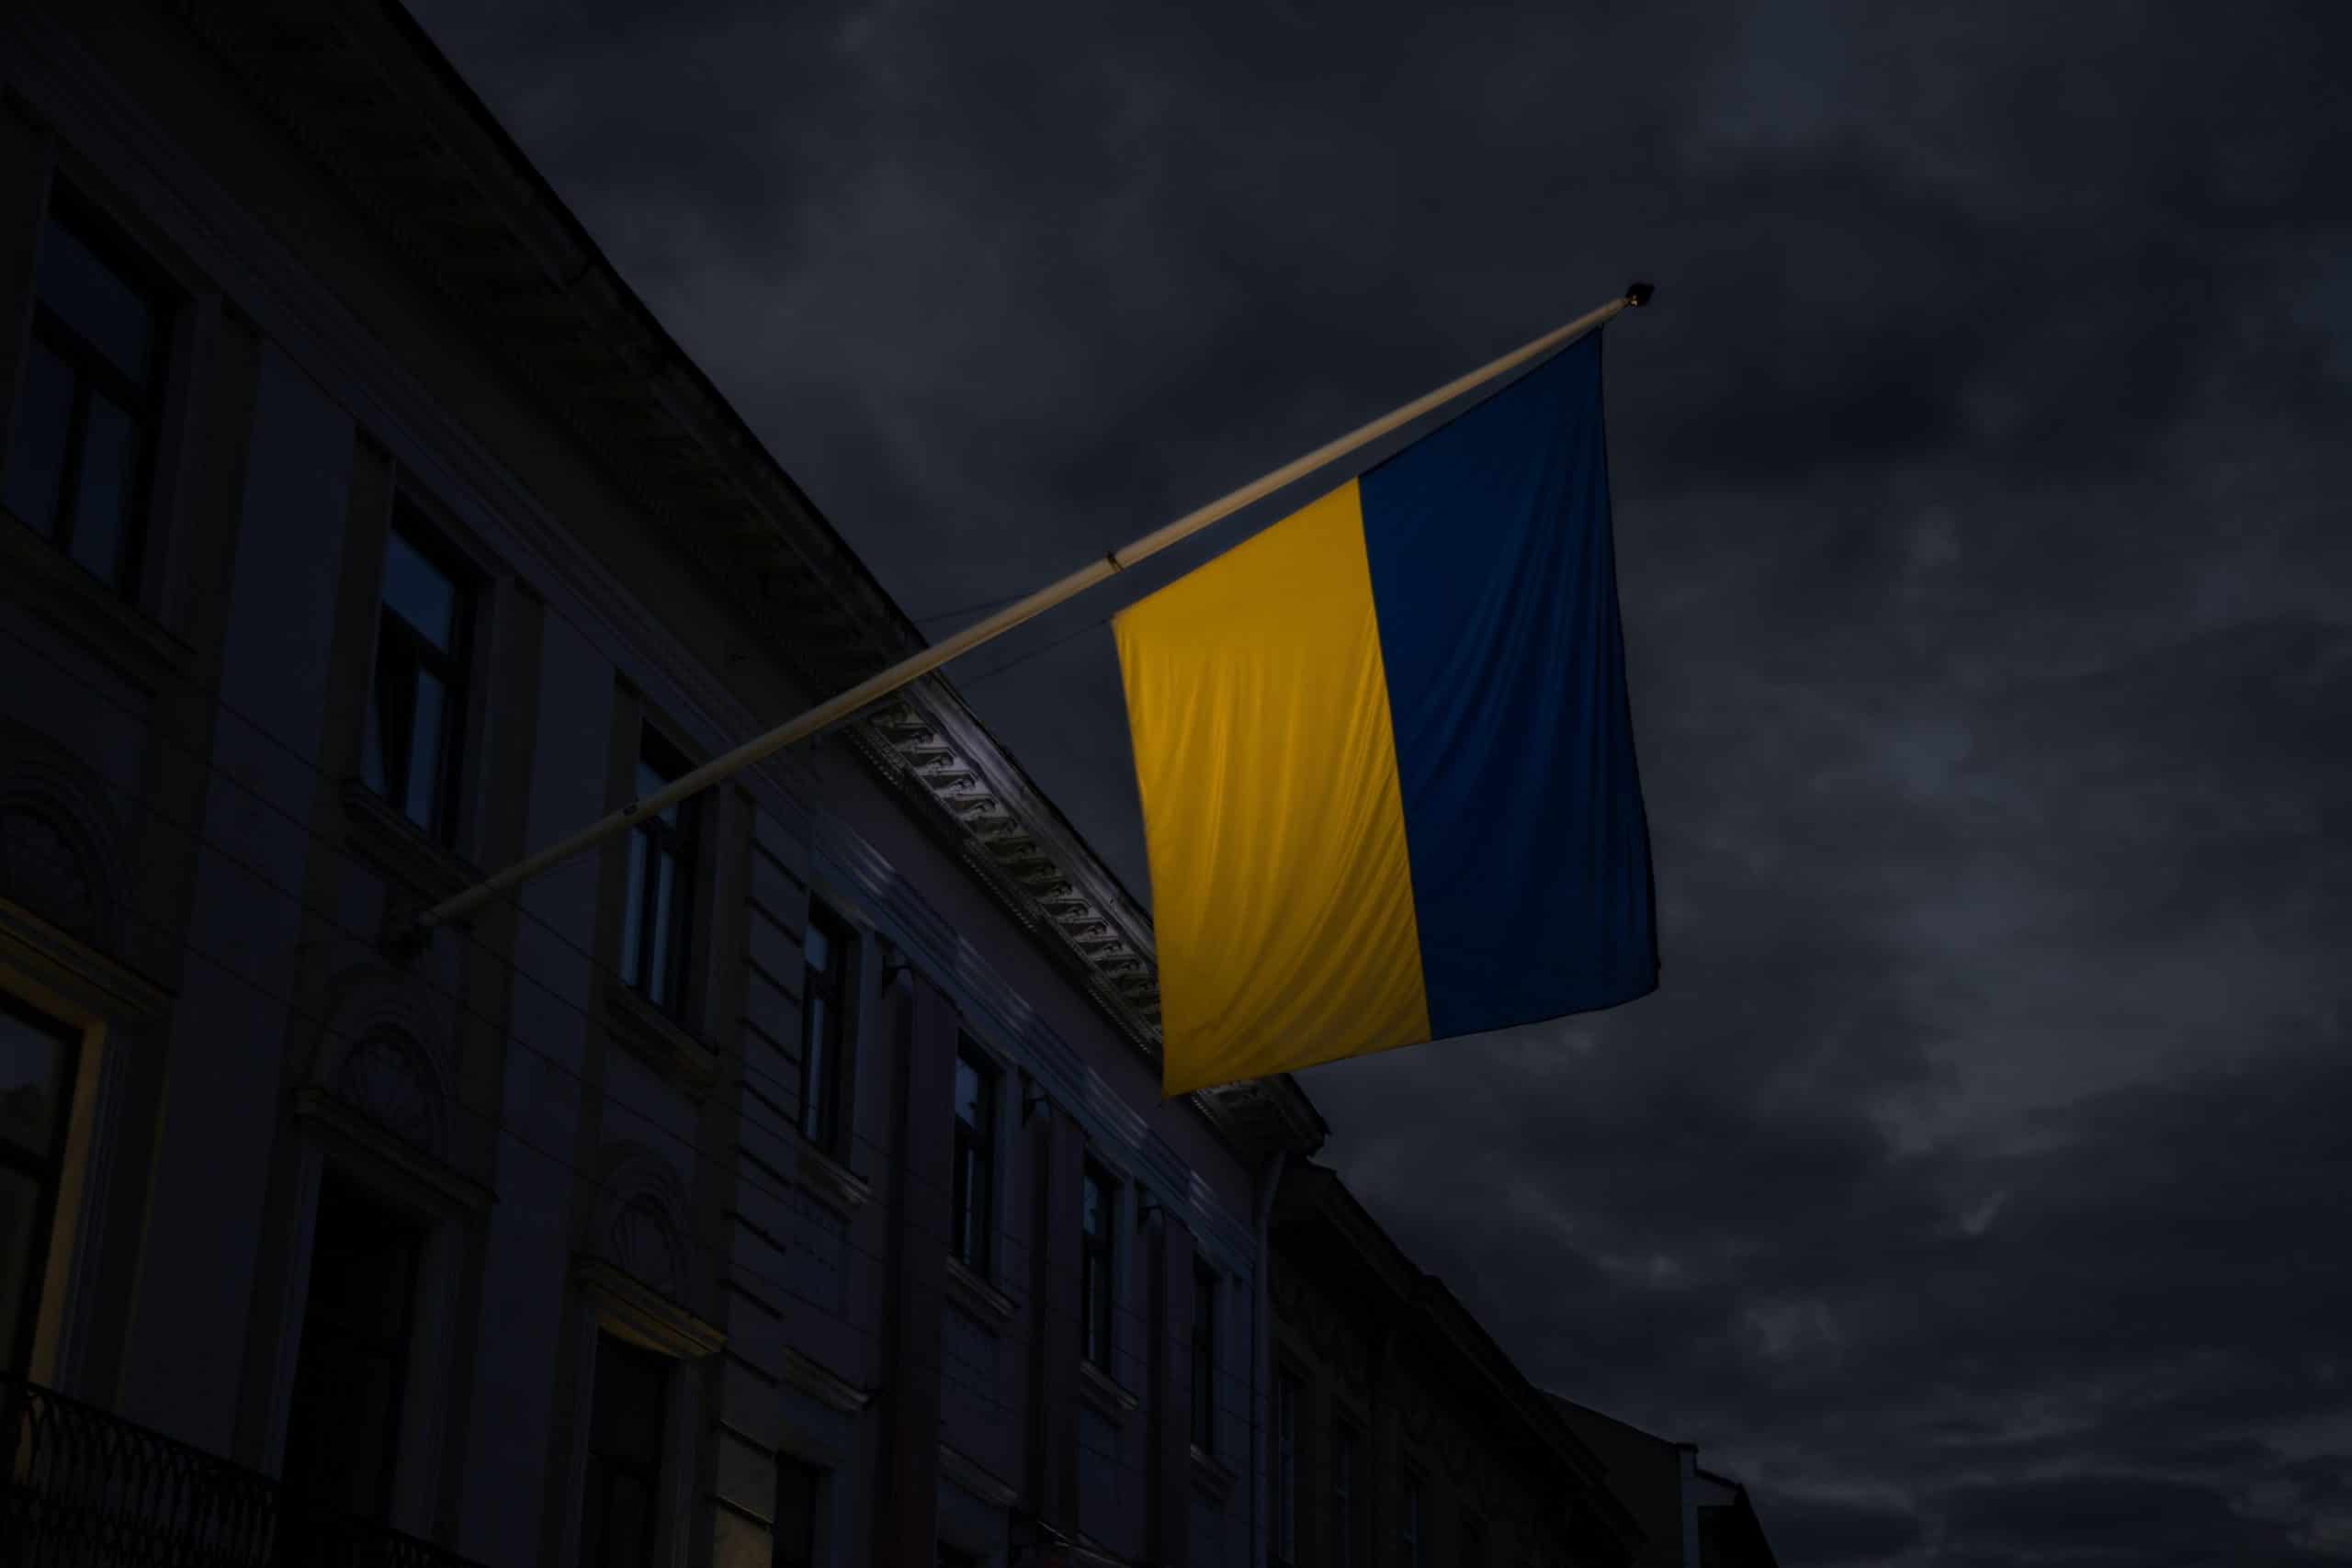 Ukrainian flag flying from side of building, against a dark-set stormy sky